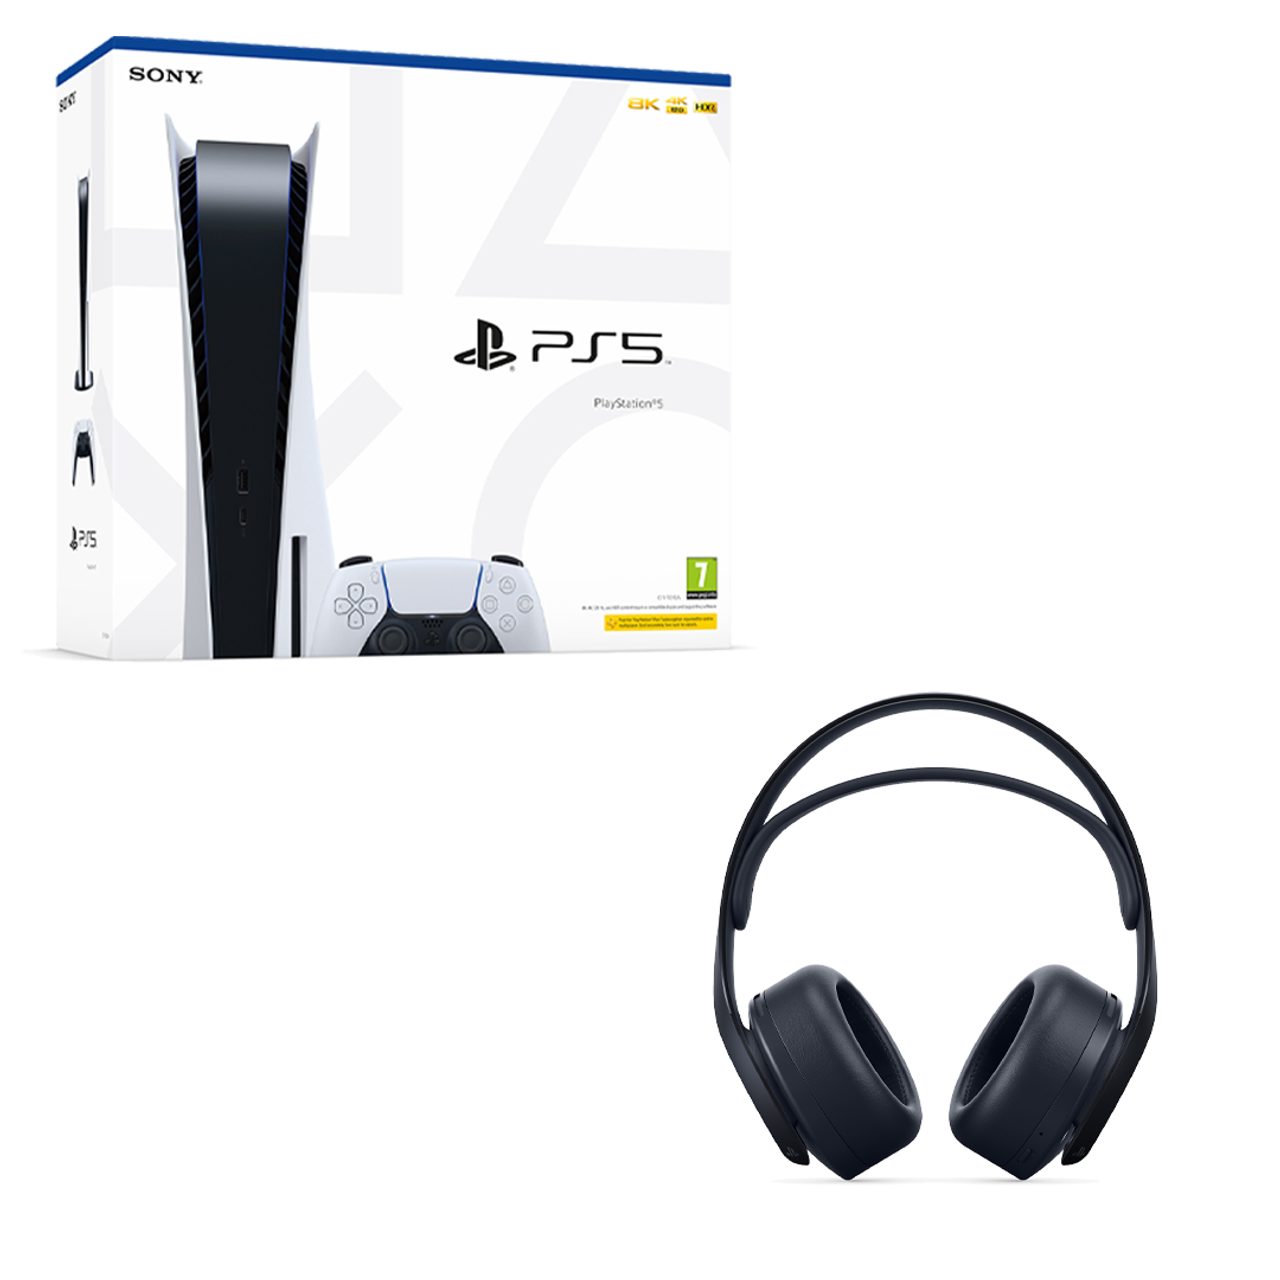 Sony PULSE 3D Wireless Gaming Headset for PlayStation 5